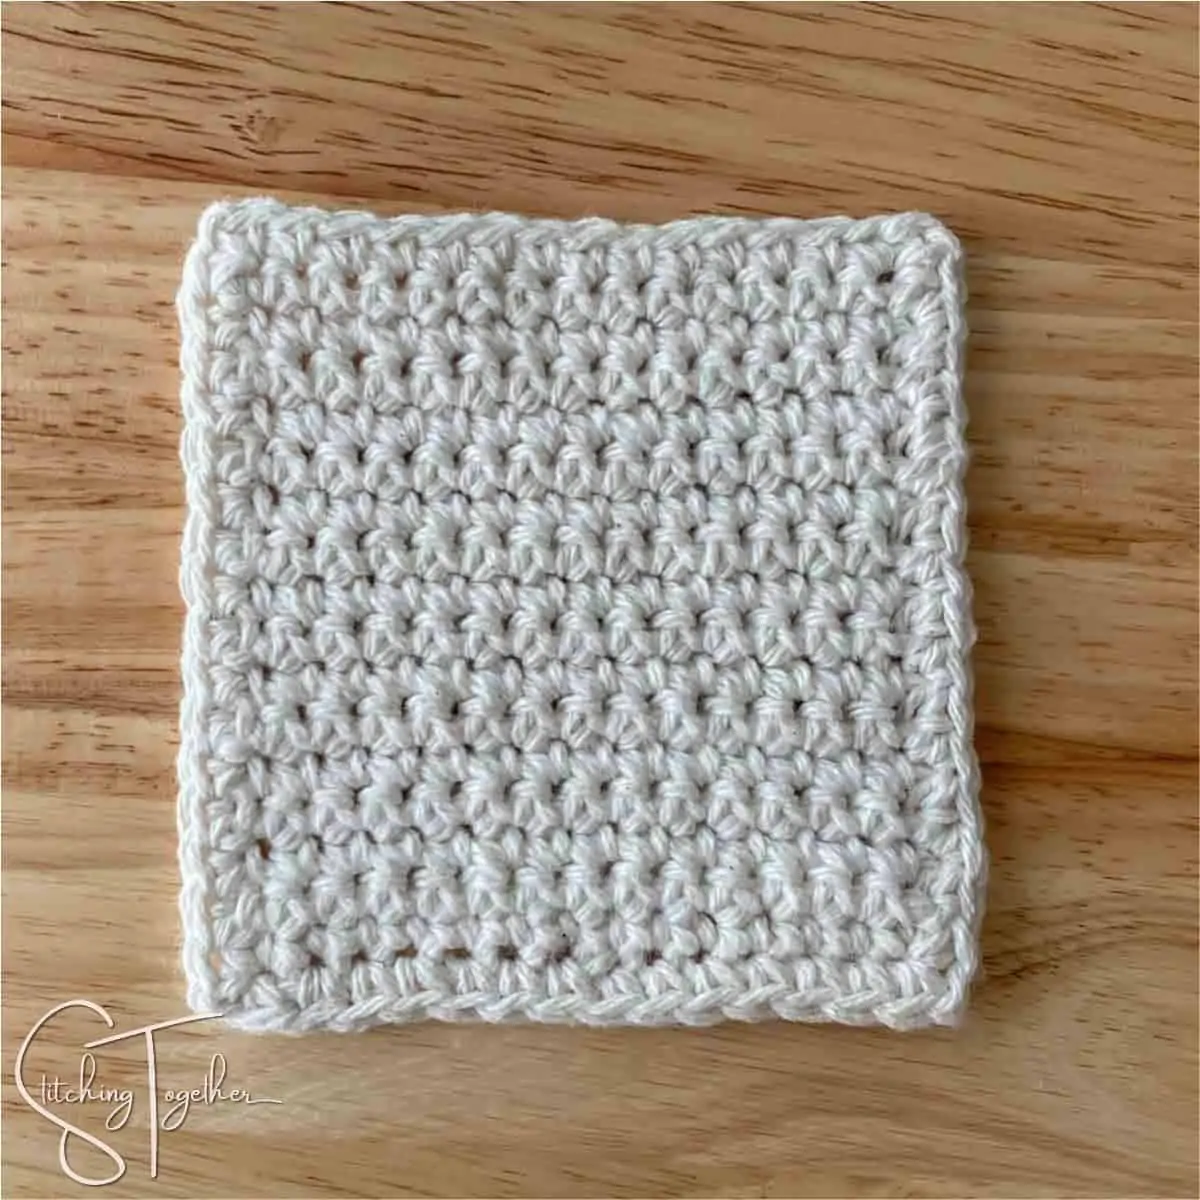 completed easy square crochet coaster